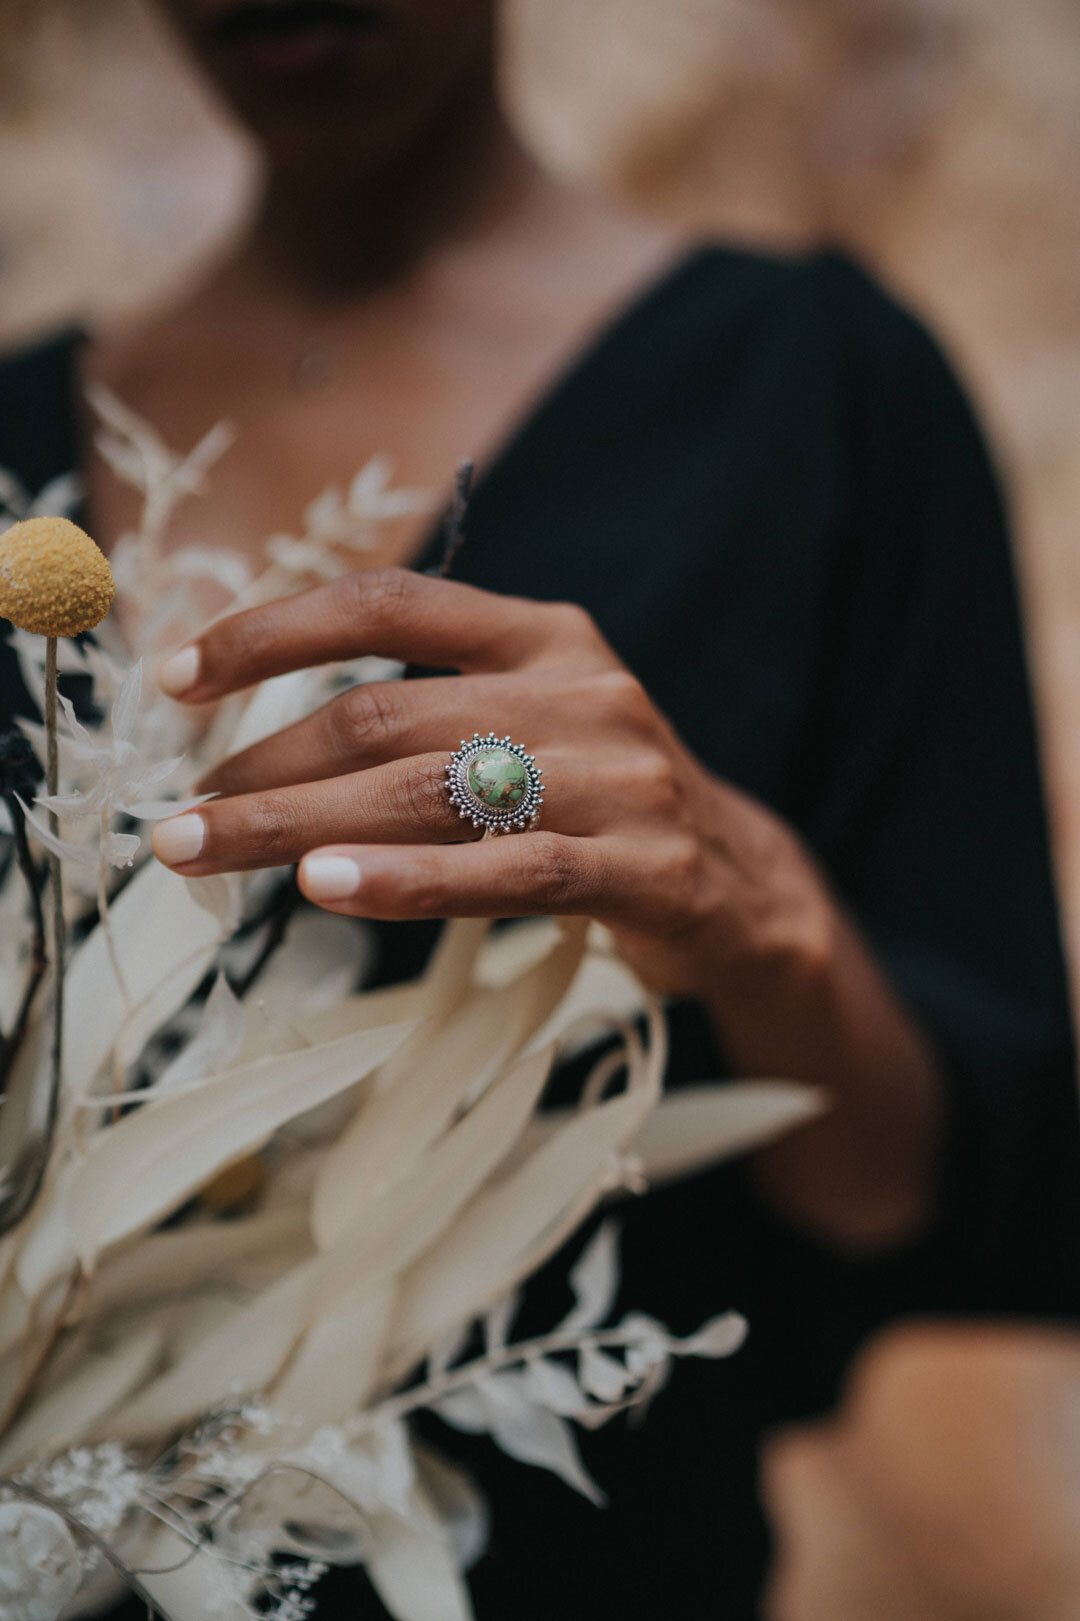 Black woman's hand with diamond ring touching white desert bouquet